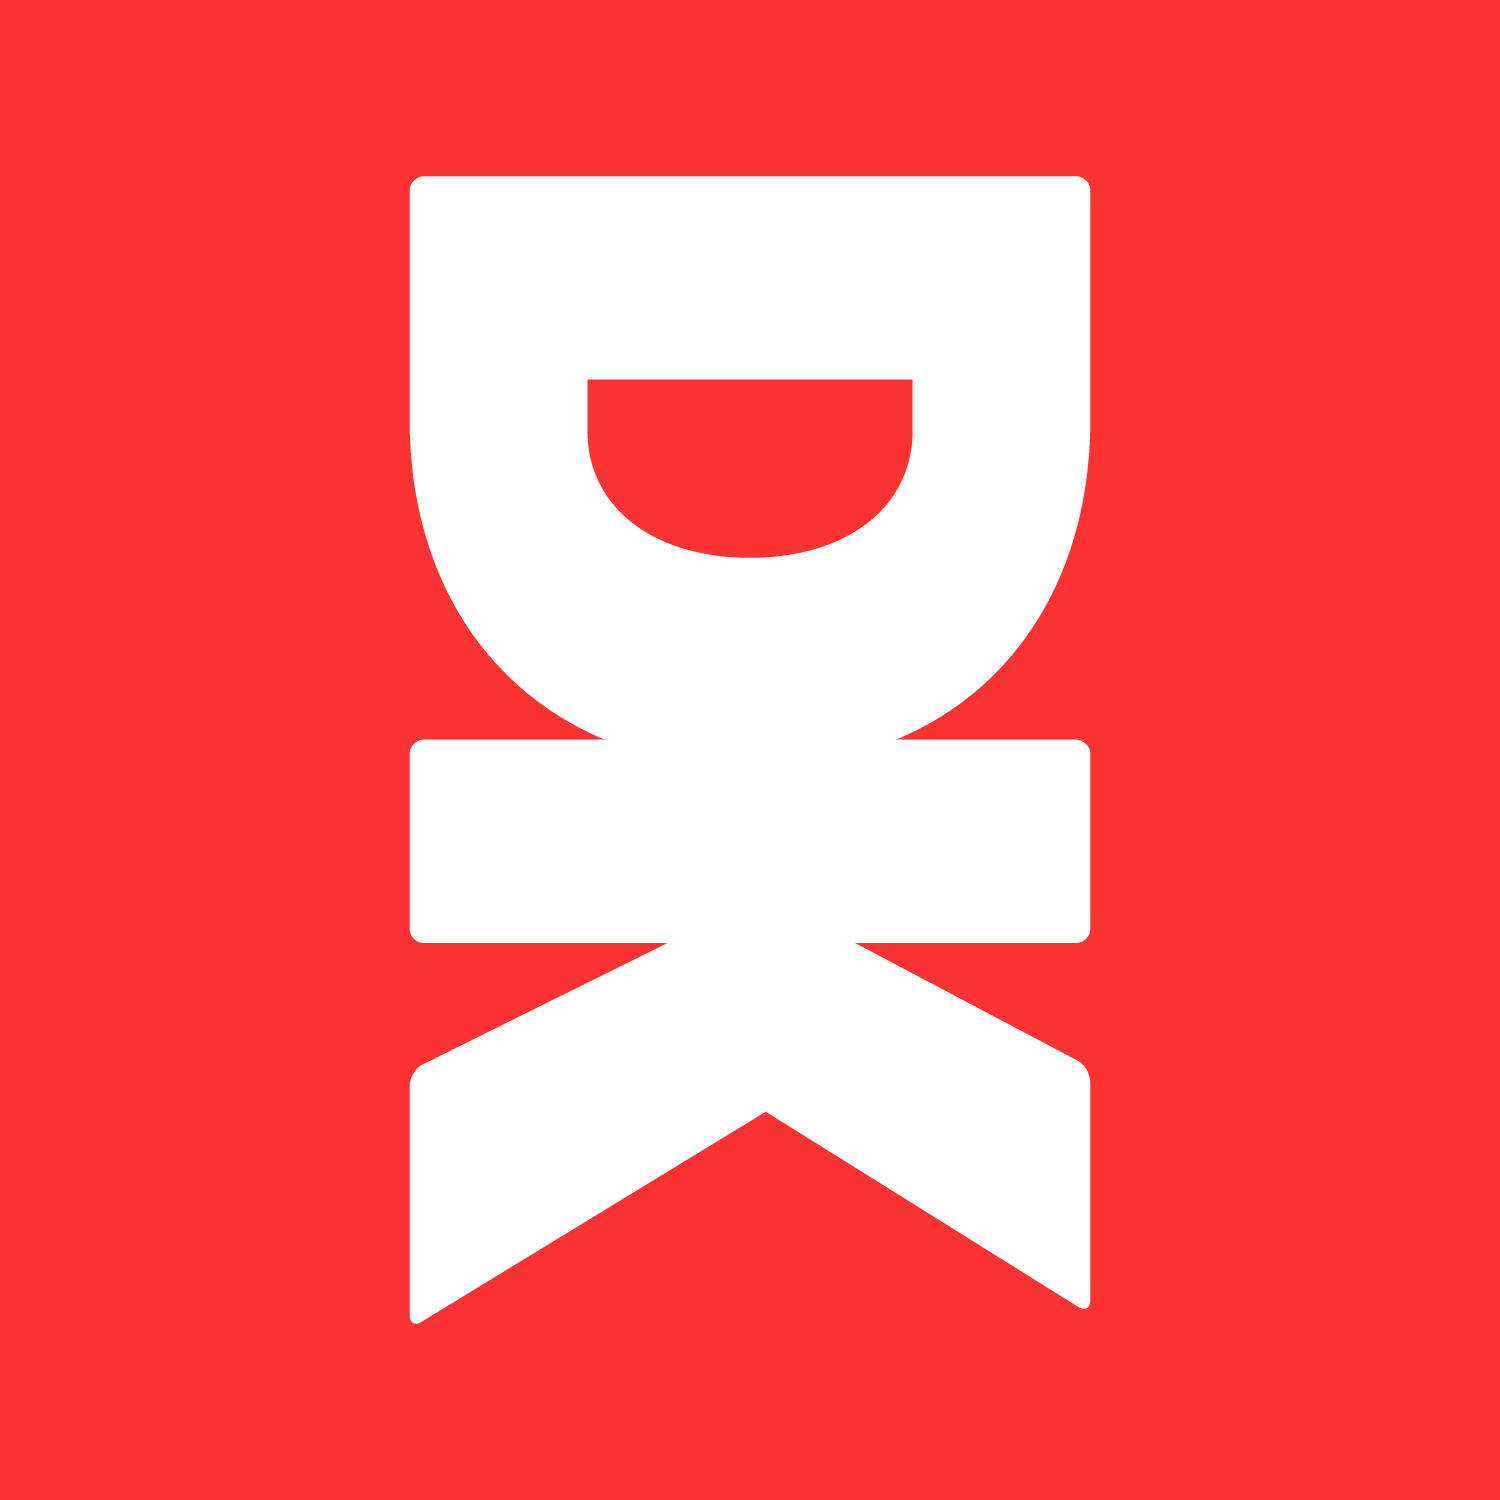 The Sites logo which is a red square with a white glyph in the middle. The glyph is made up of the letters D and K stacked vertically. 